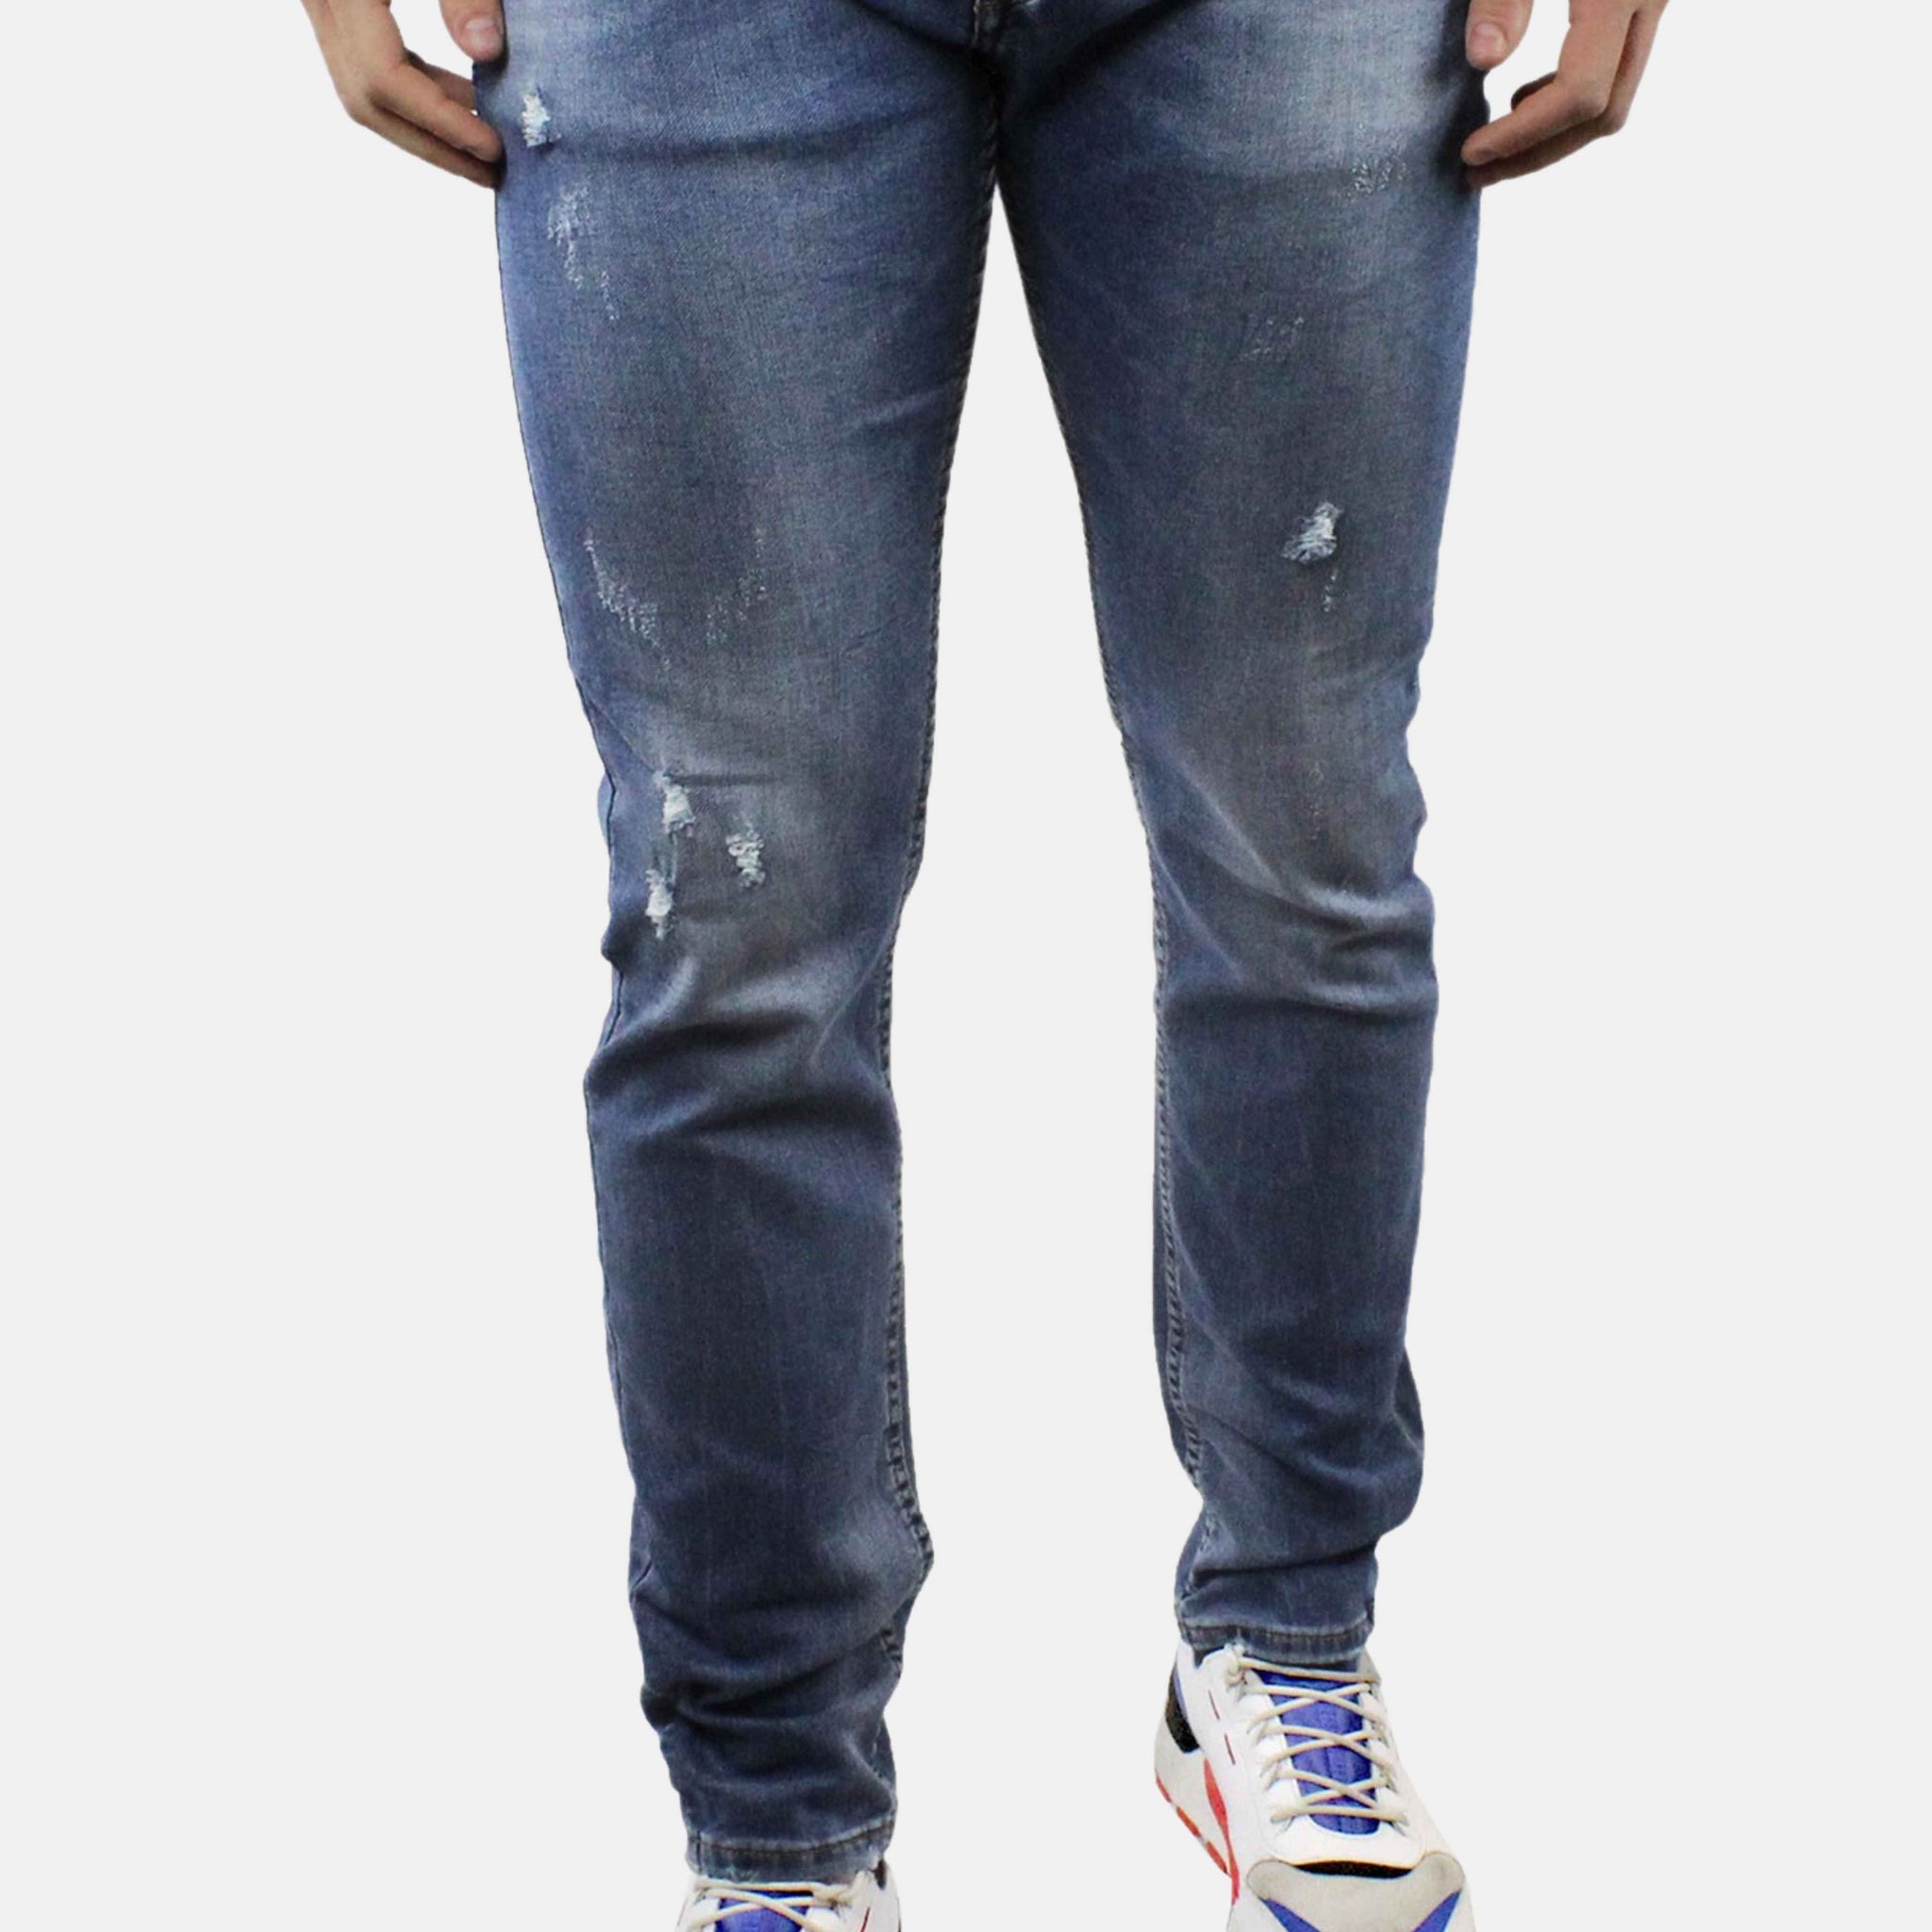 Dark jeans with light rips